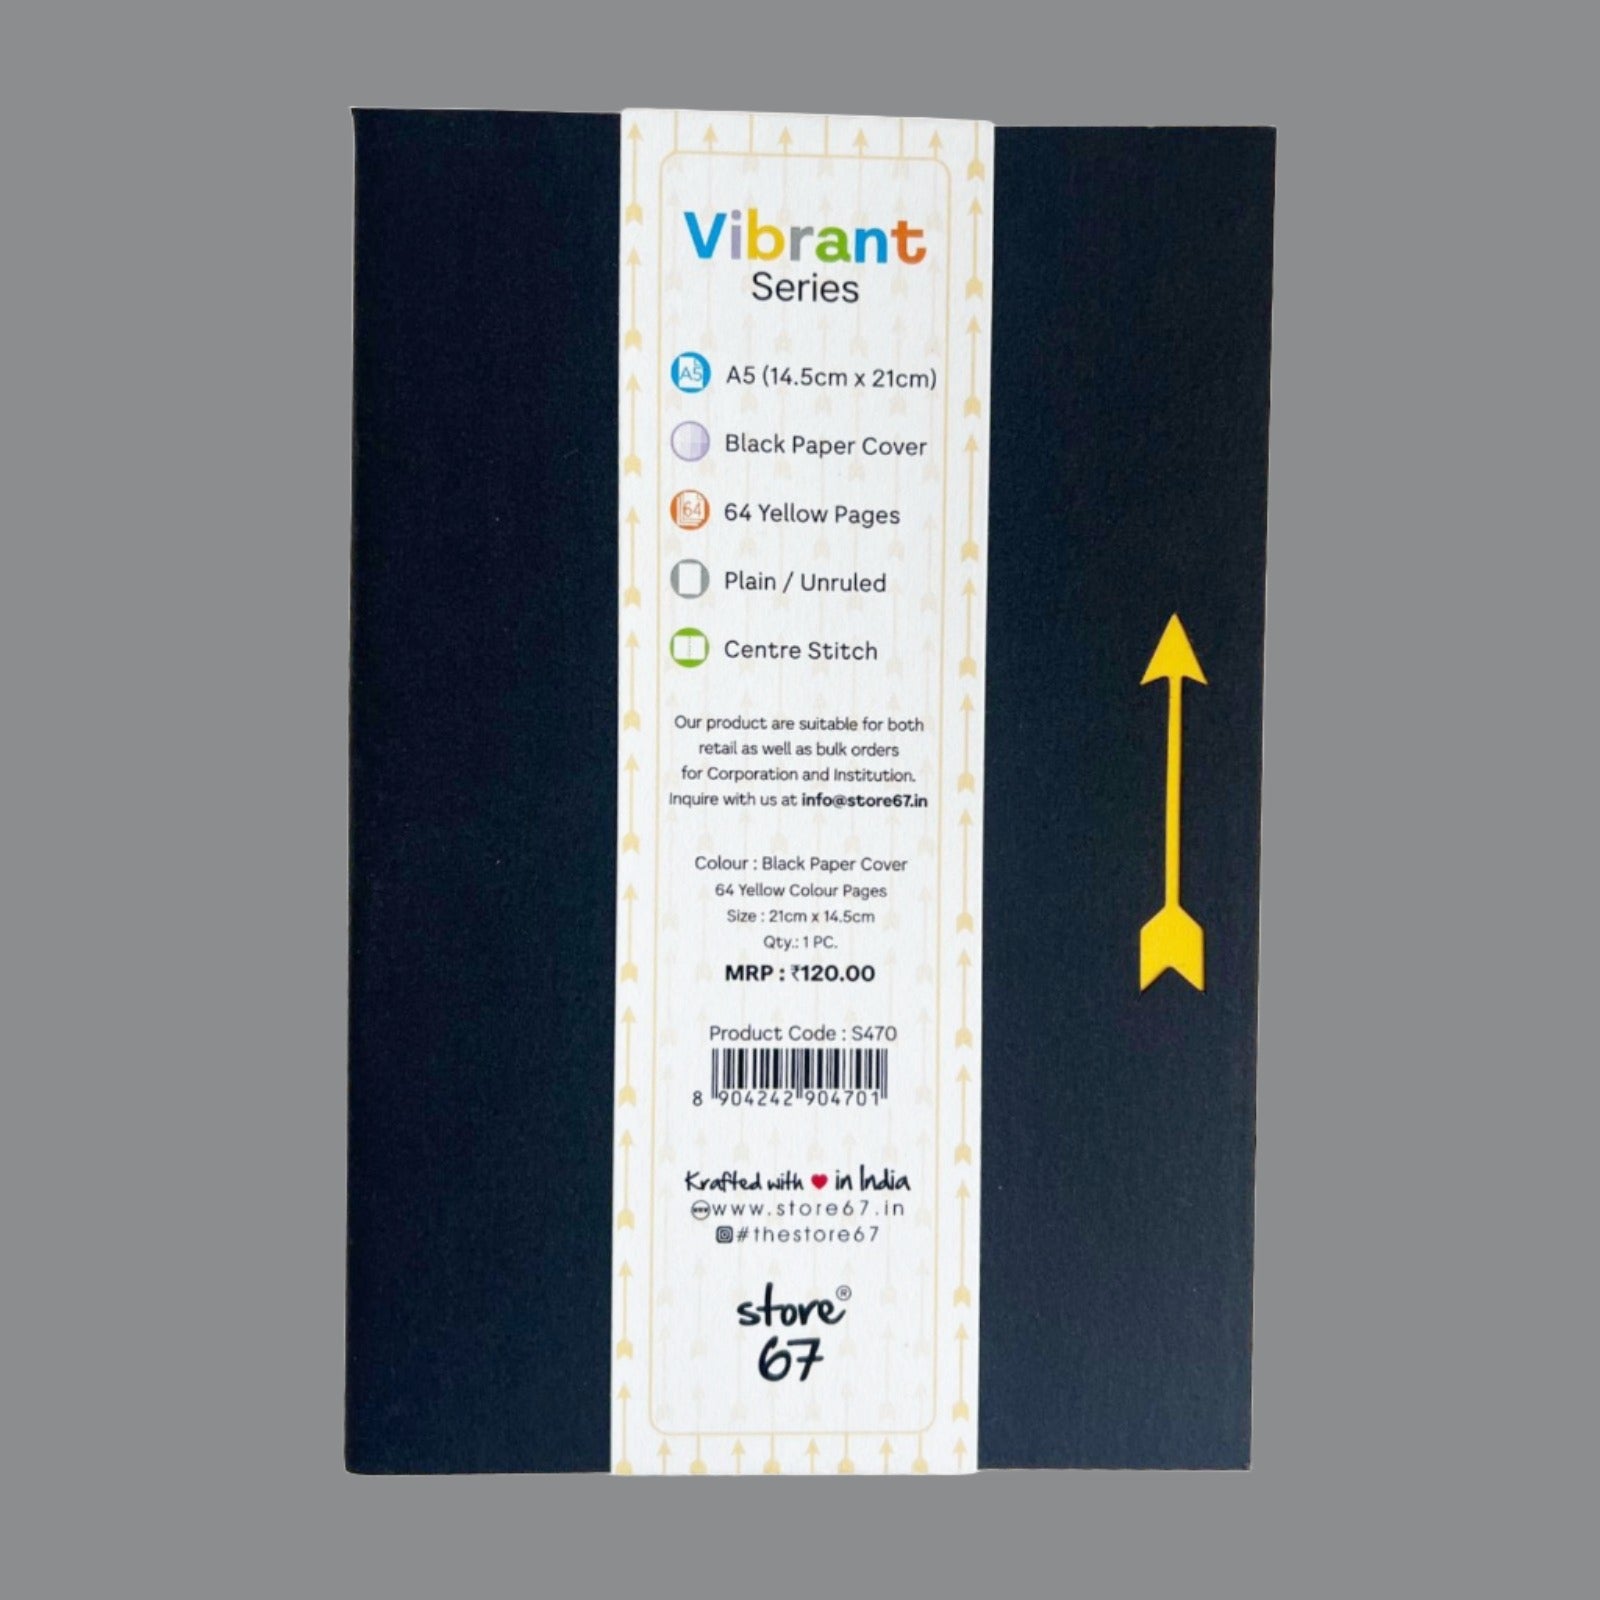 angela jessen recommends The Hins Yellow Pages